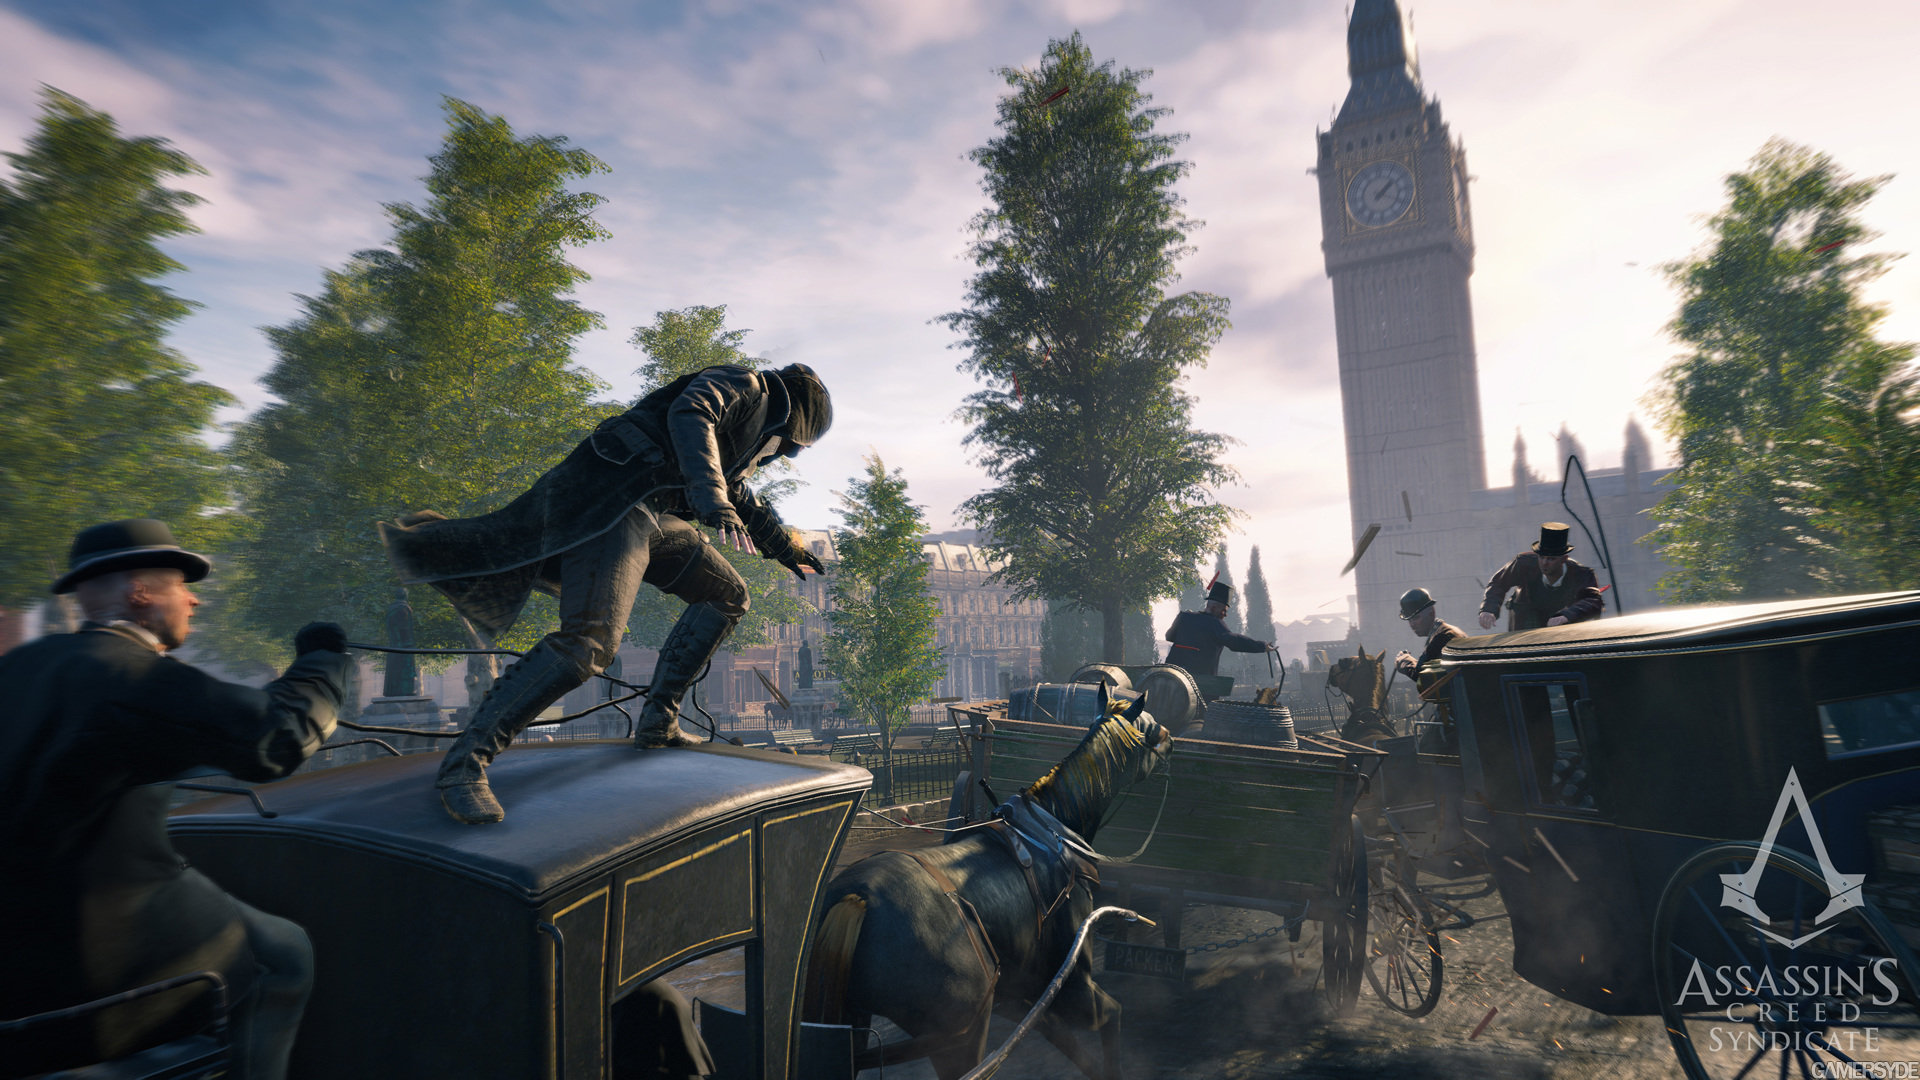 image_assassin_s_creed_syndicate-28271-3228_0006.jpg